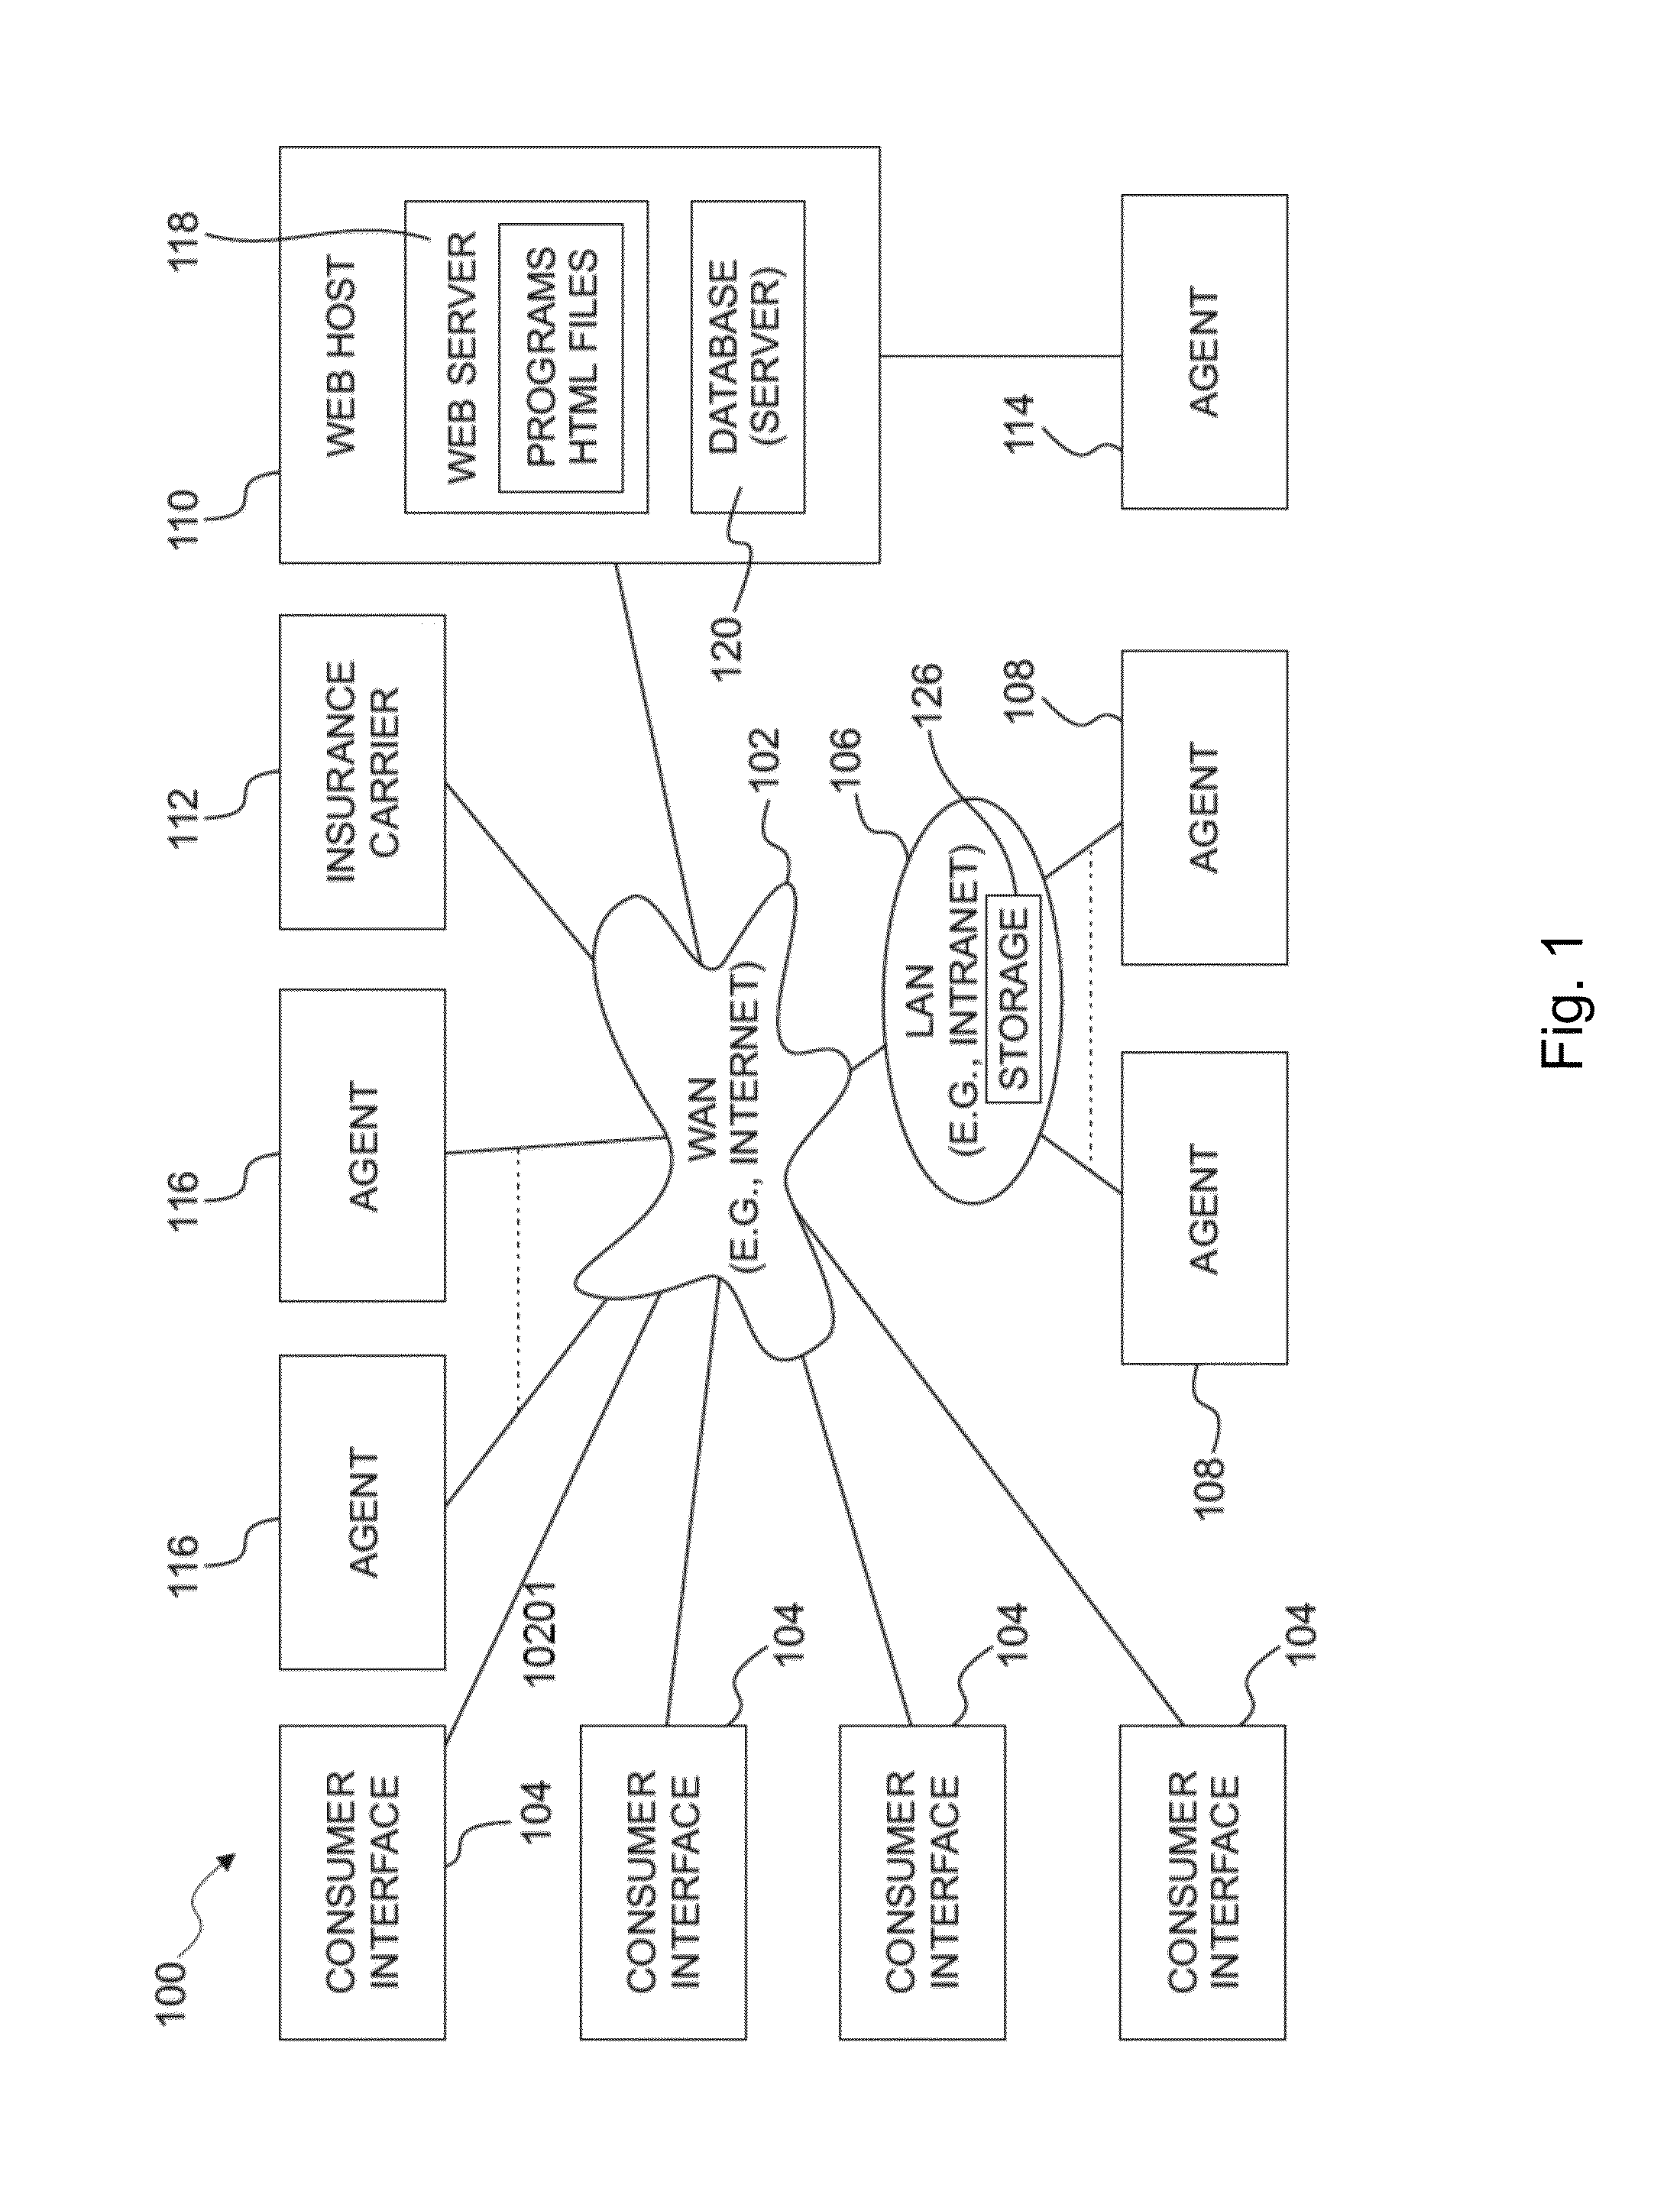 Interactive systems and methods for supporting financial planning related activities